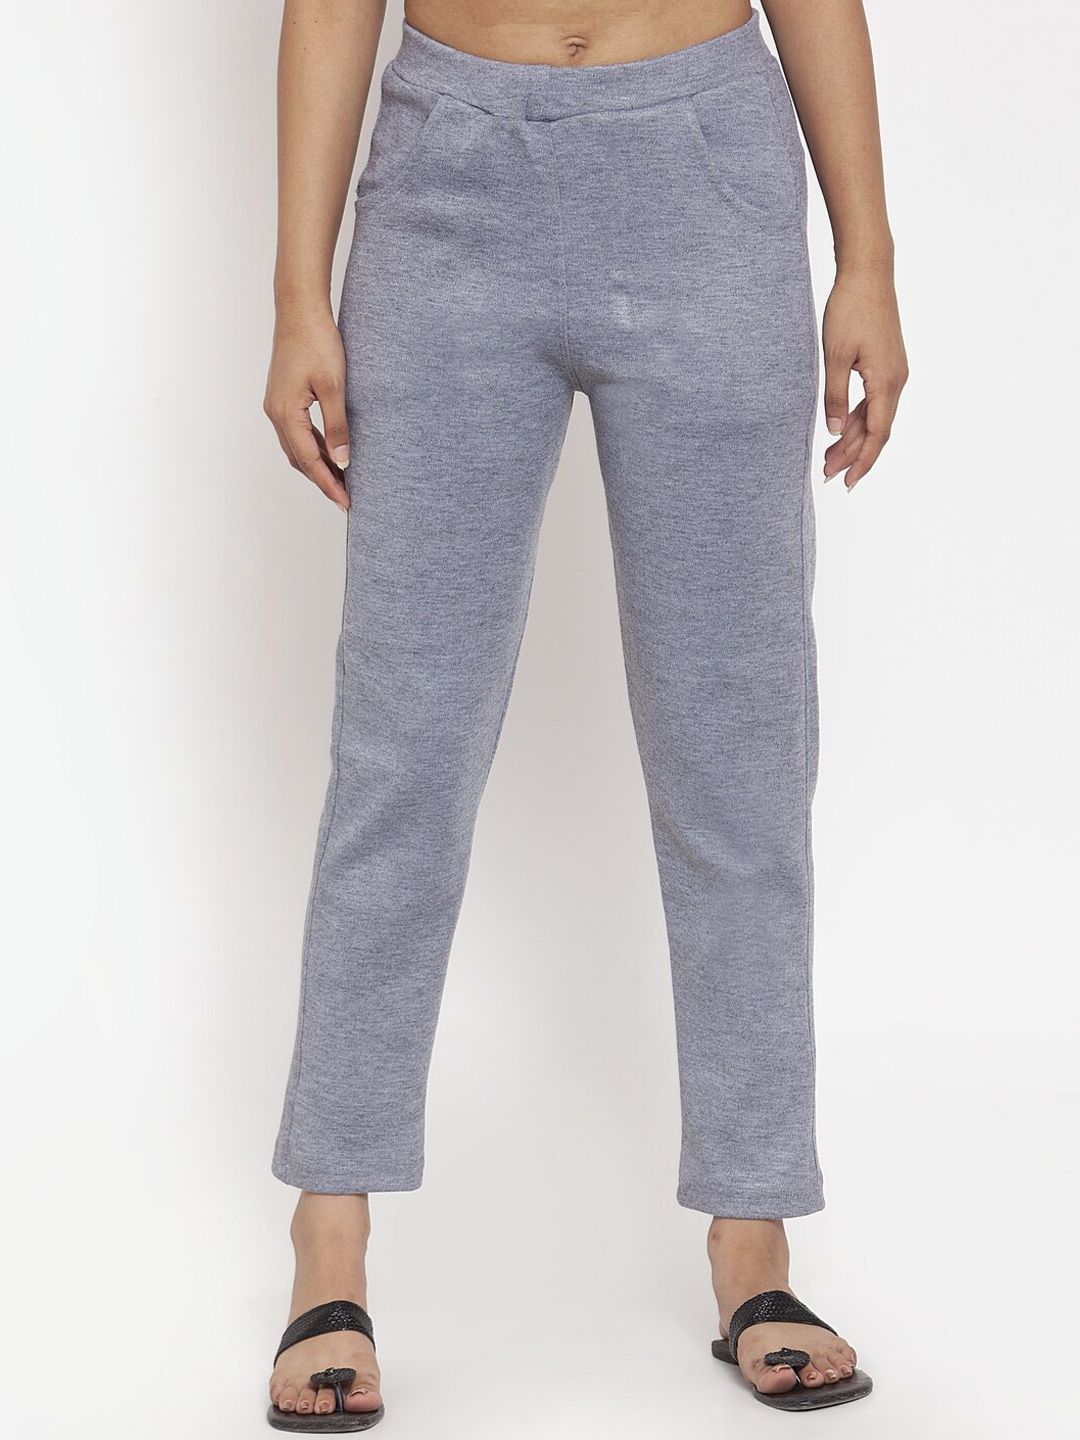 TAG 7 Women Grey Ethnic Cigarette Trousers Price in India